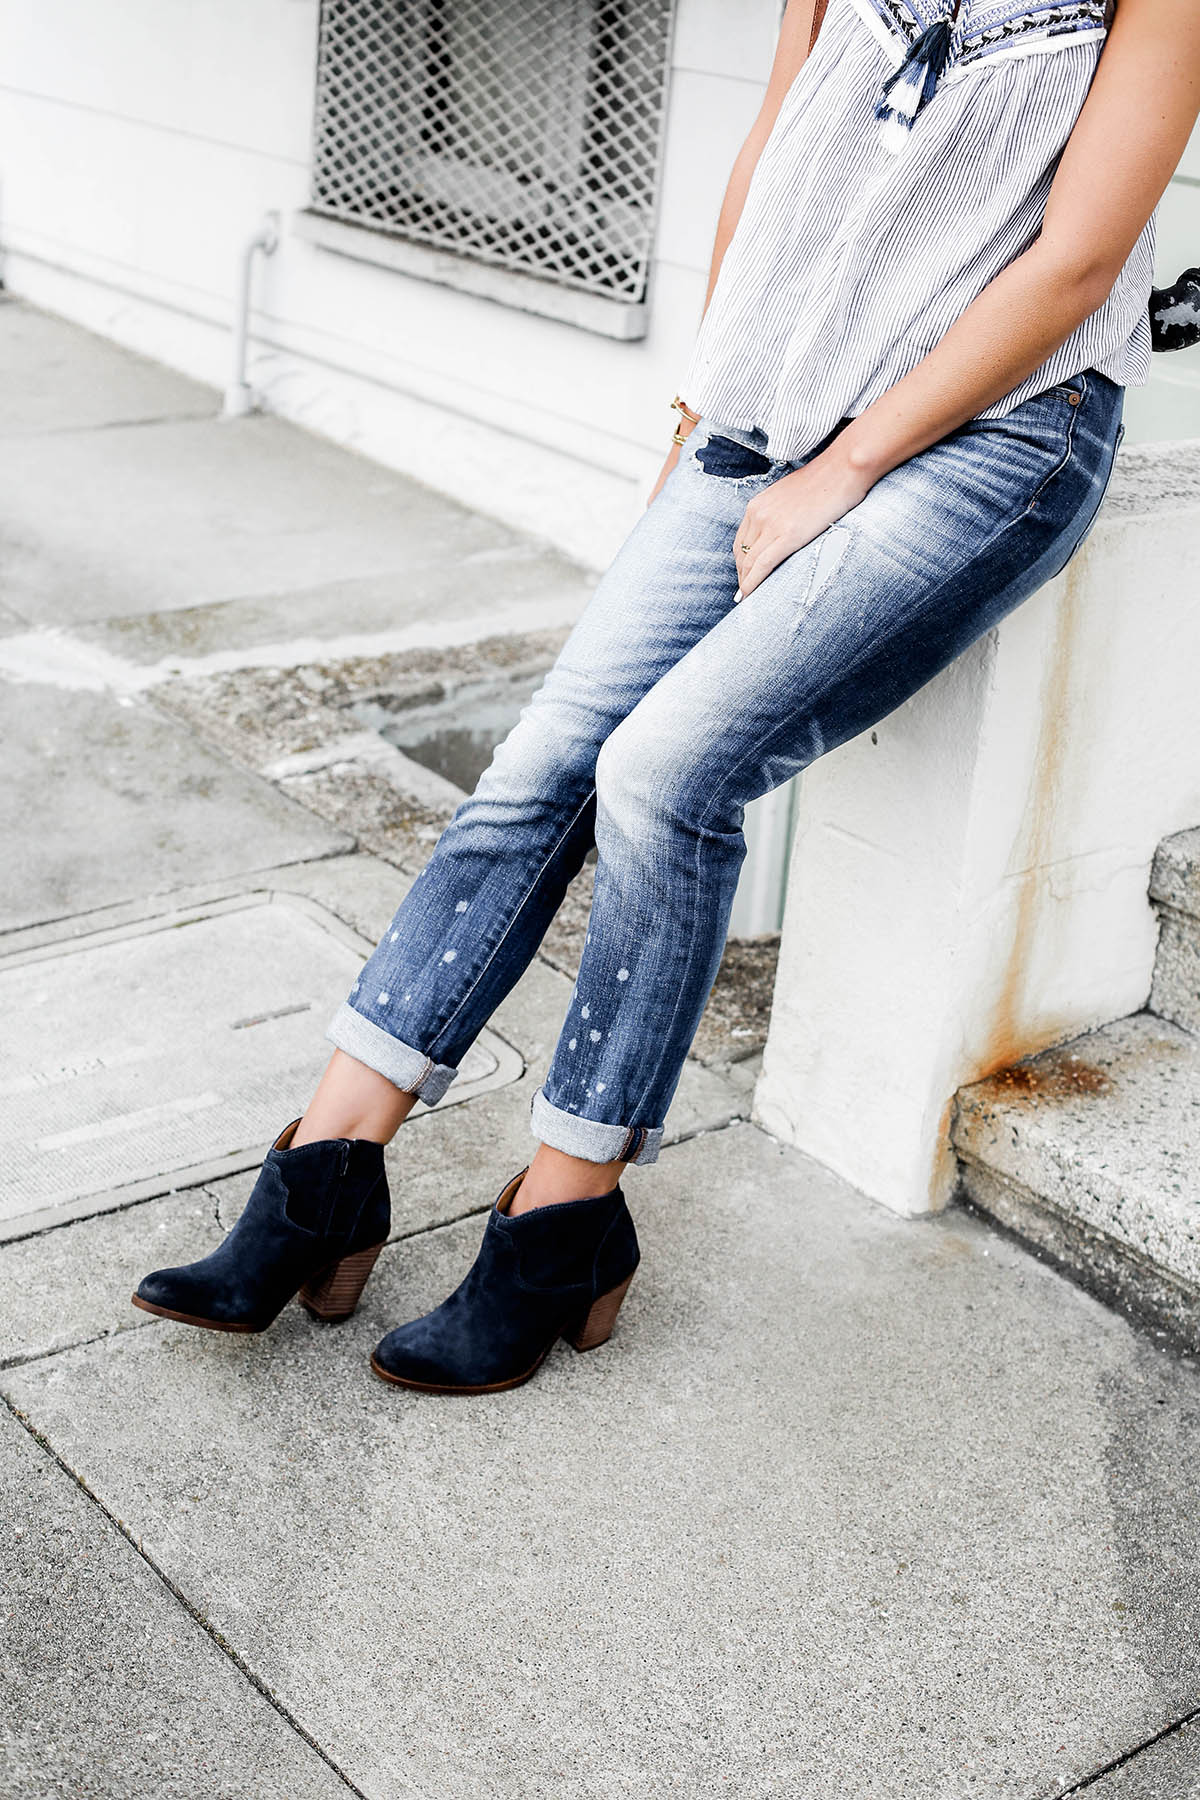 fall fashion trends patchwork denim boyfriend jeans and lucky brand blue suede ankle boots